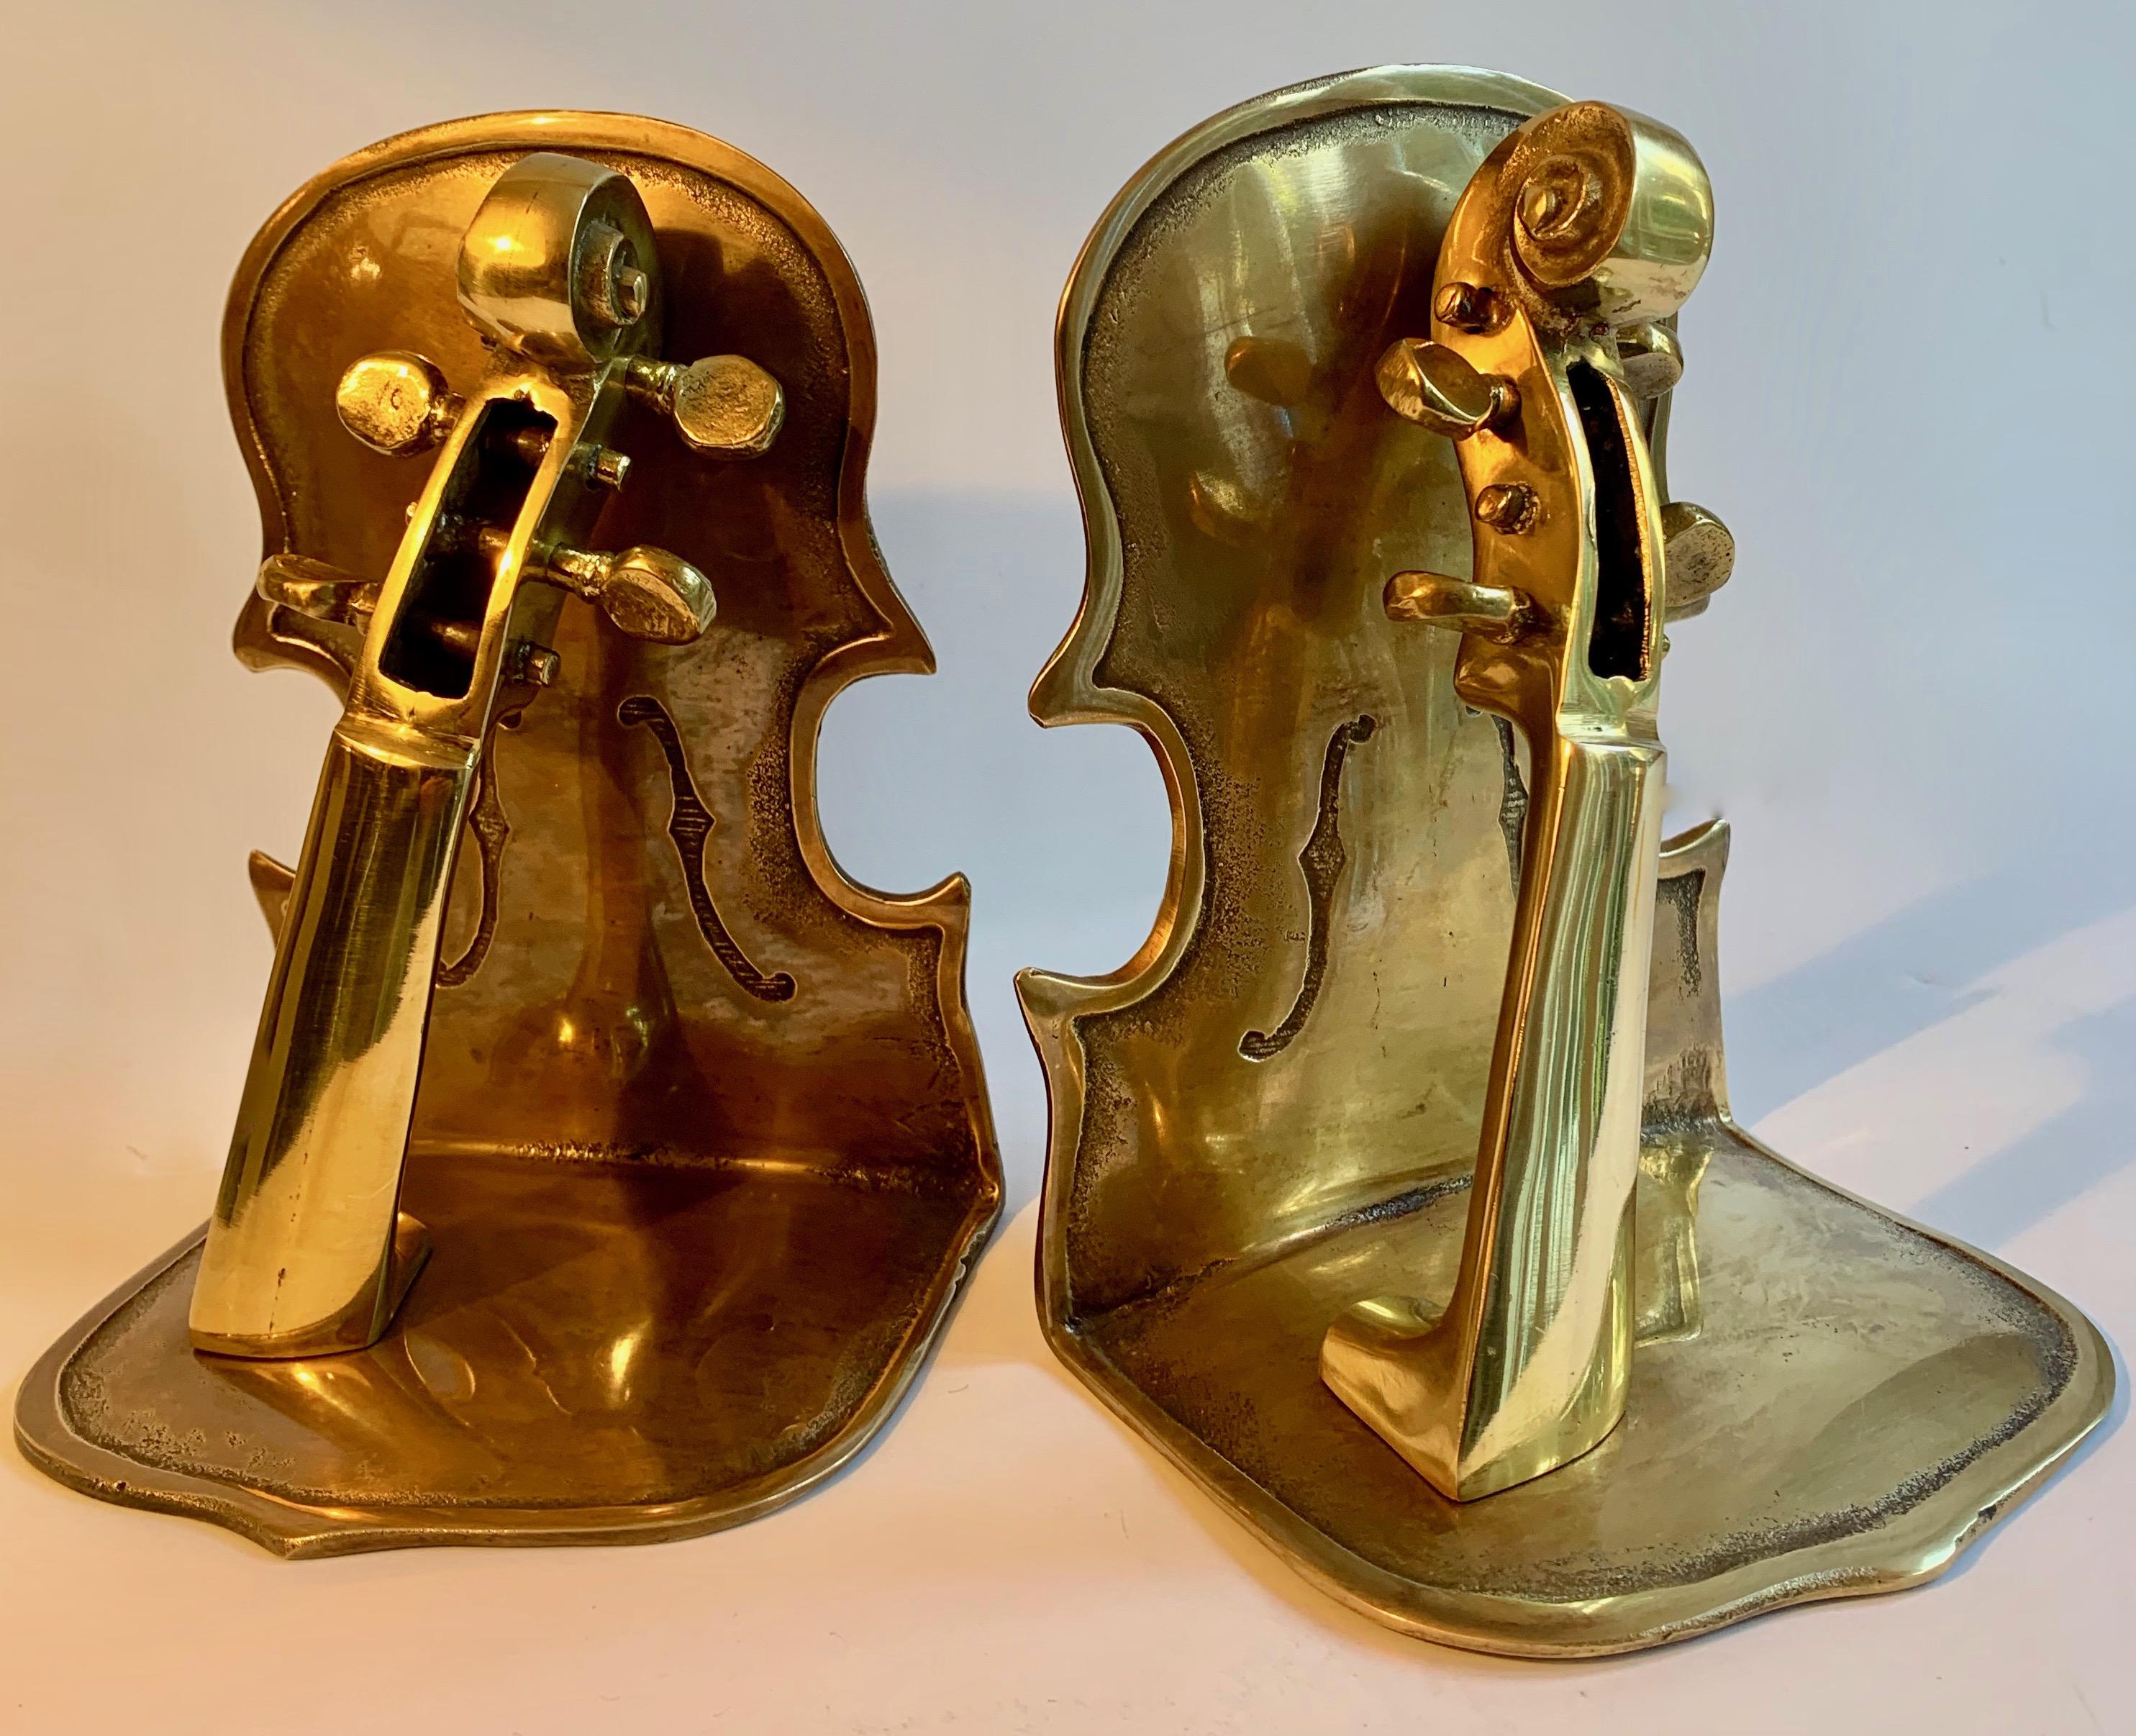 Pair of solid brass guitar bookends, or a guitar shaped instrument! Three dimensional and solid, the pair are the perfect companion to the music enthusiast or books on the subject.